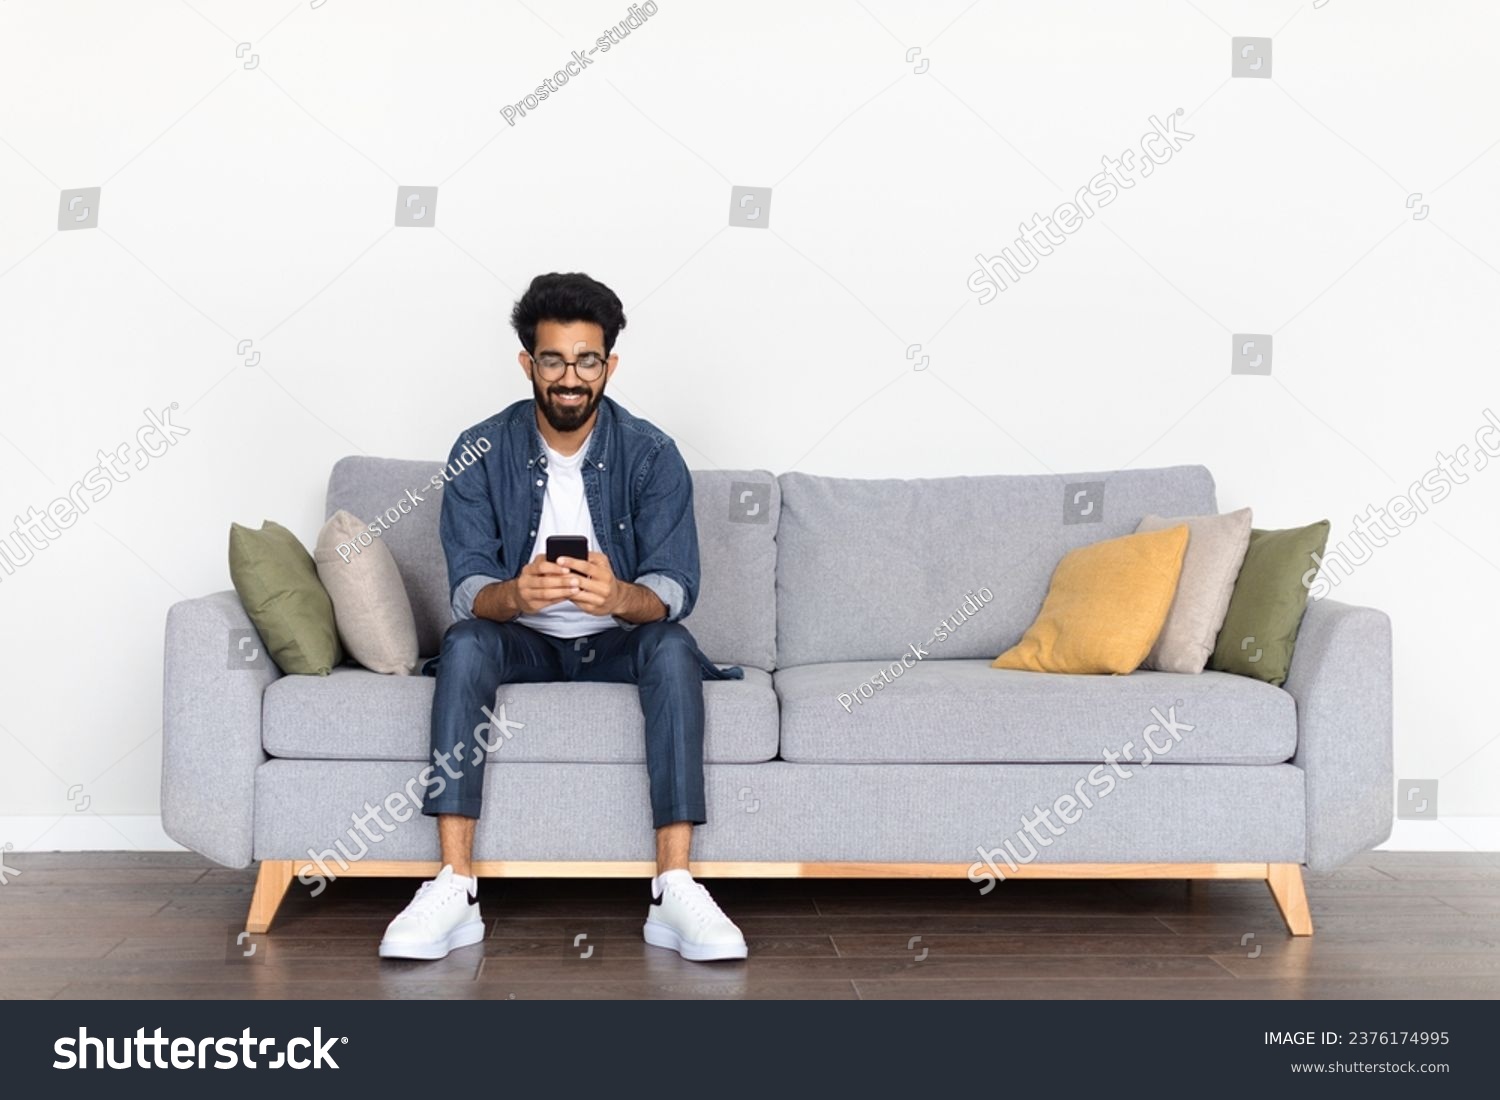 Casual Indian guy, wearing a casual outfit, sits on a cozy sofa, smiling while exploring phone, against a pristine white backdrop, illustrating a moment of joyful digital communication, copy space #2376174995